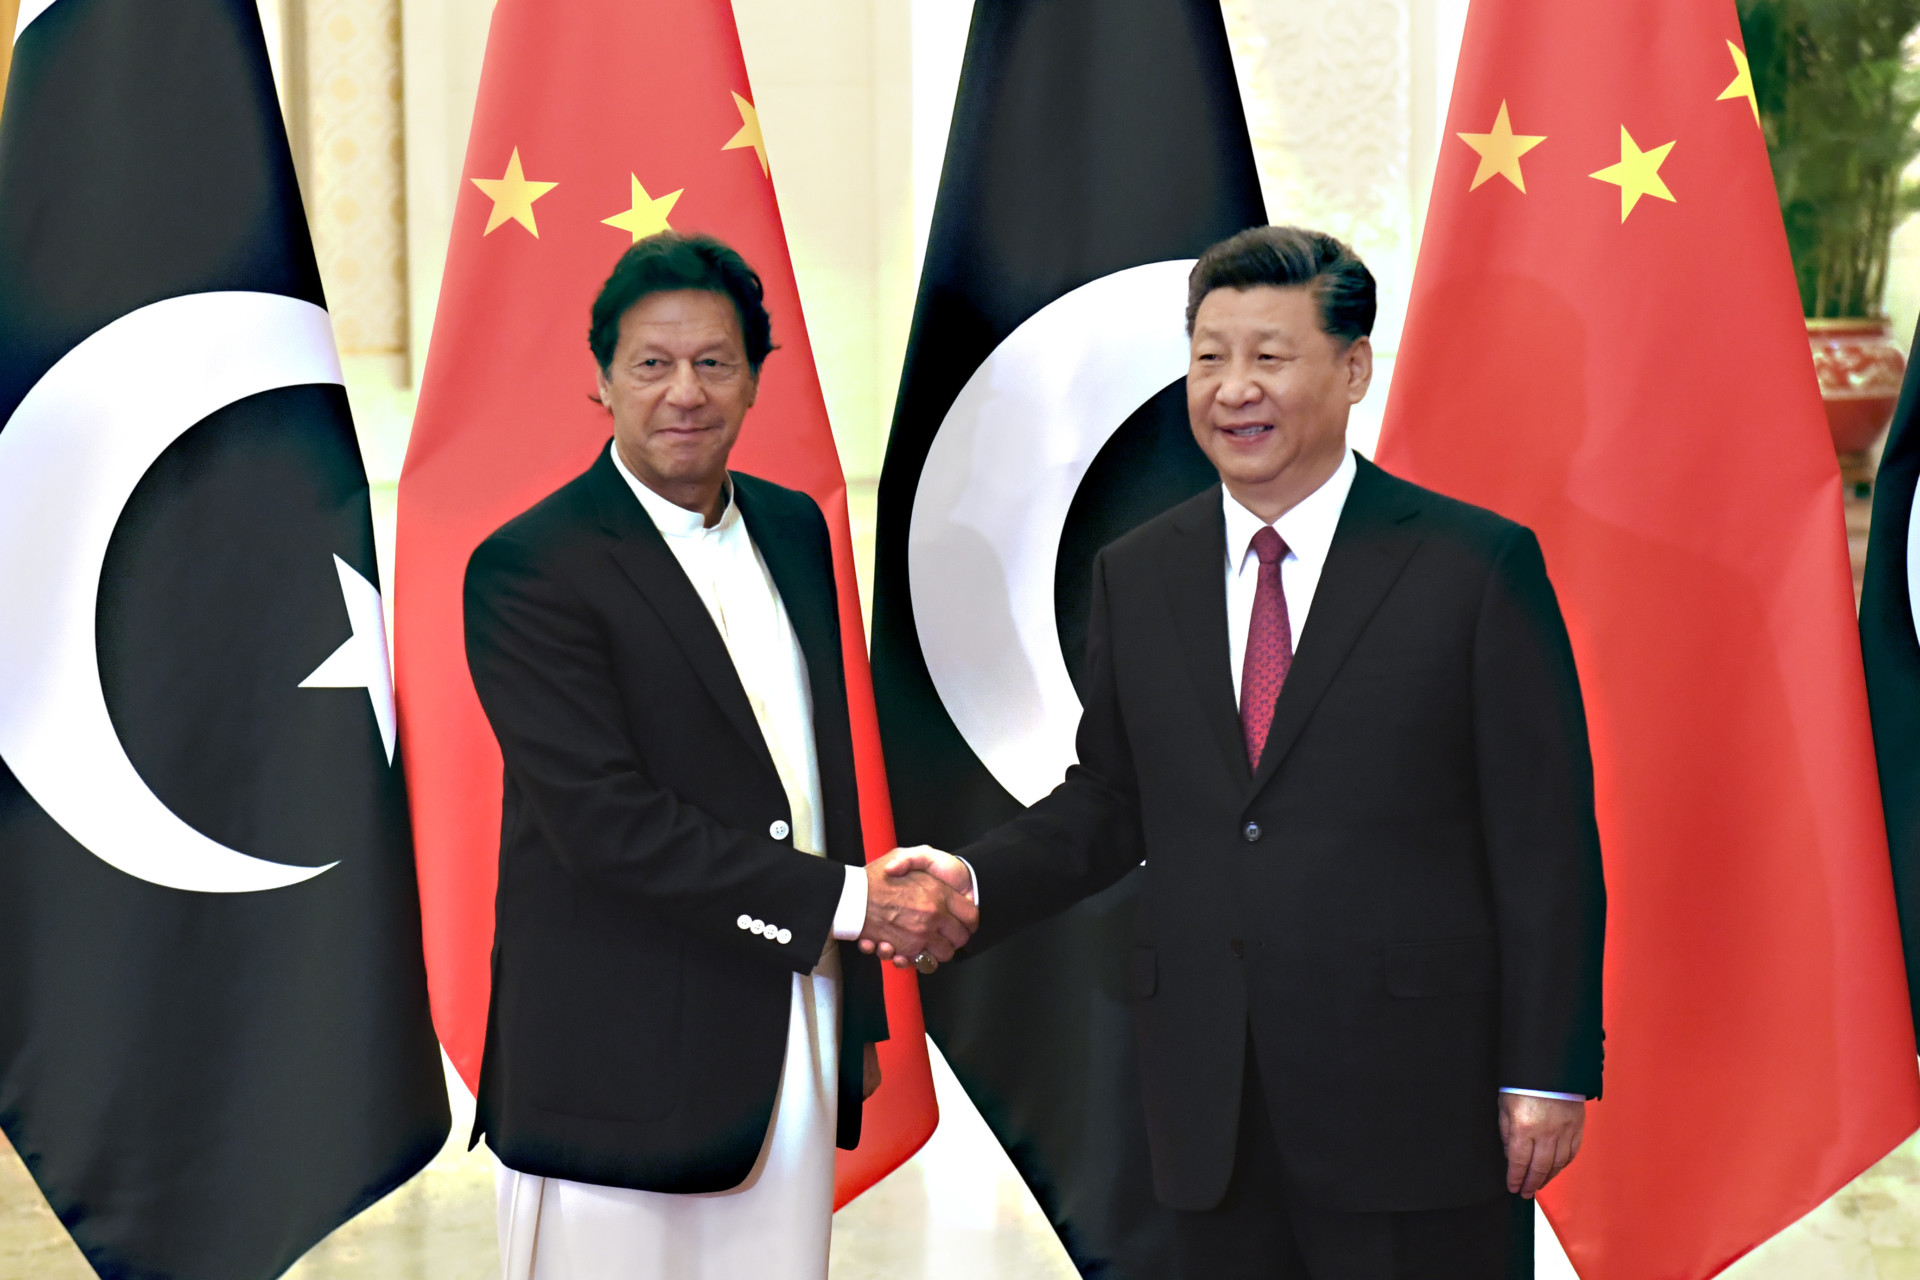 Pakistan, China agrees to safeguard multilateralism and support central role of UN in Int’l affairs